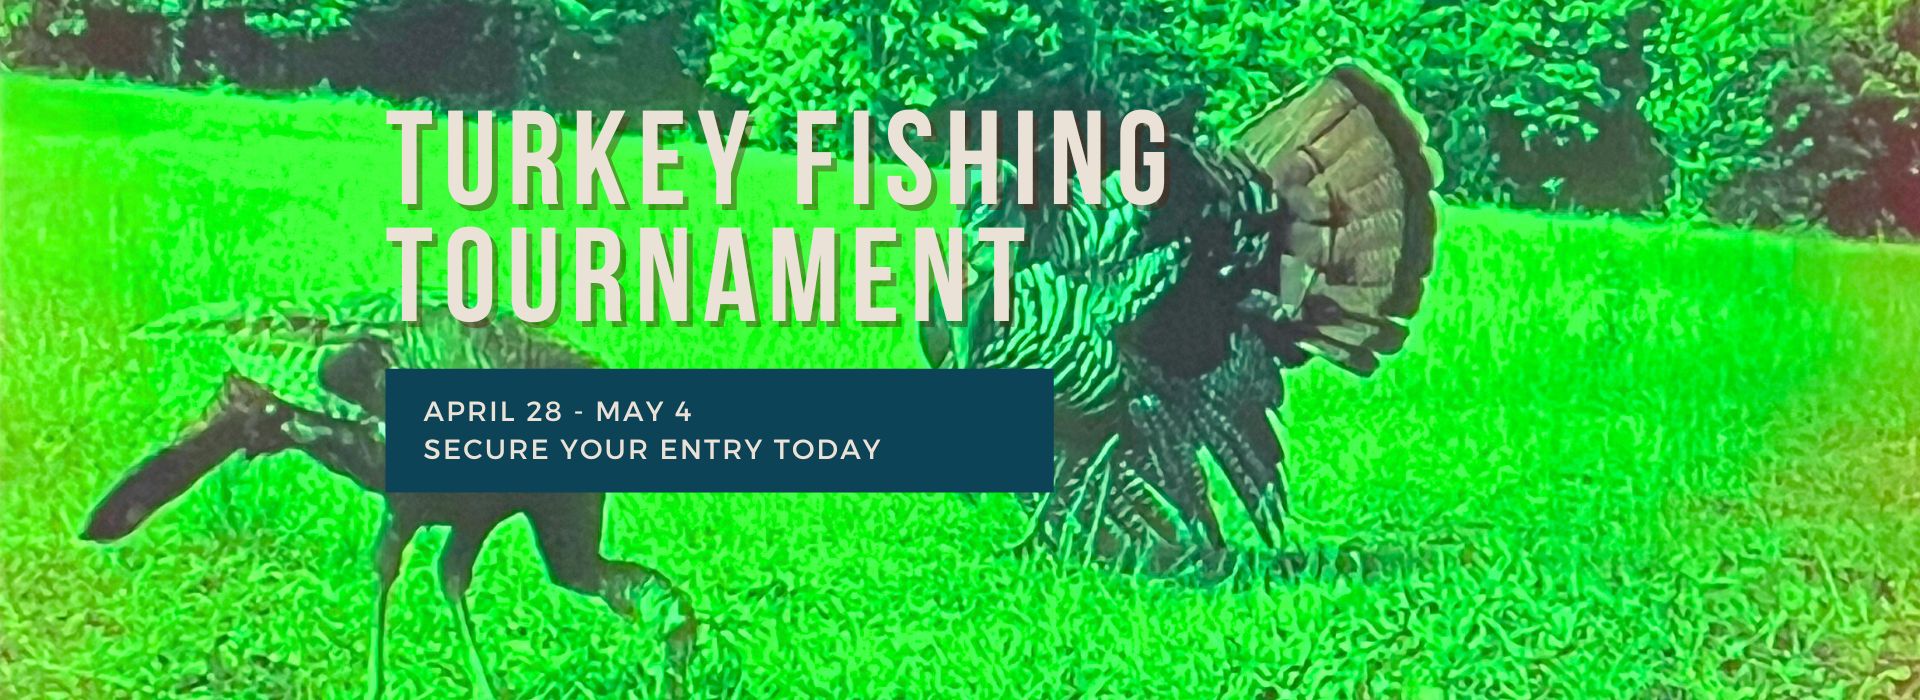 Turkey Fishing Tournament April 28th to May 4th at Kenco Outfitters. Click here to register